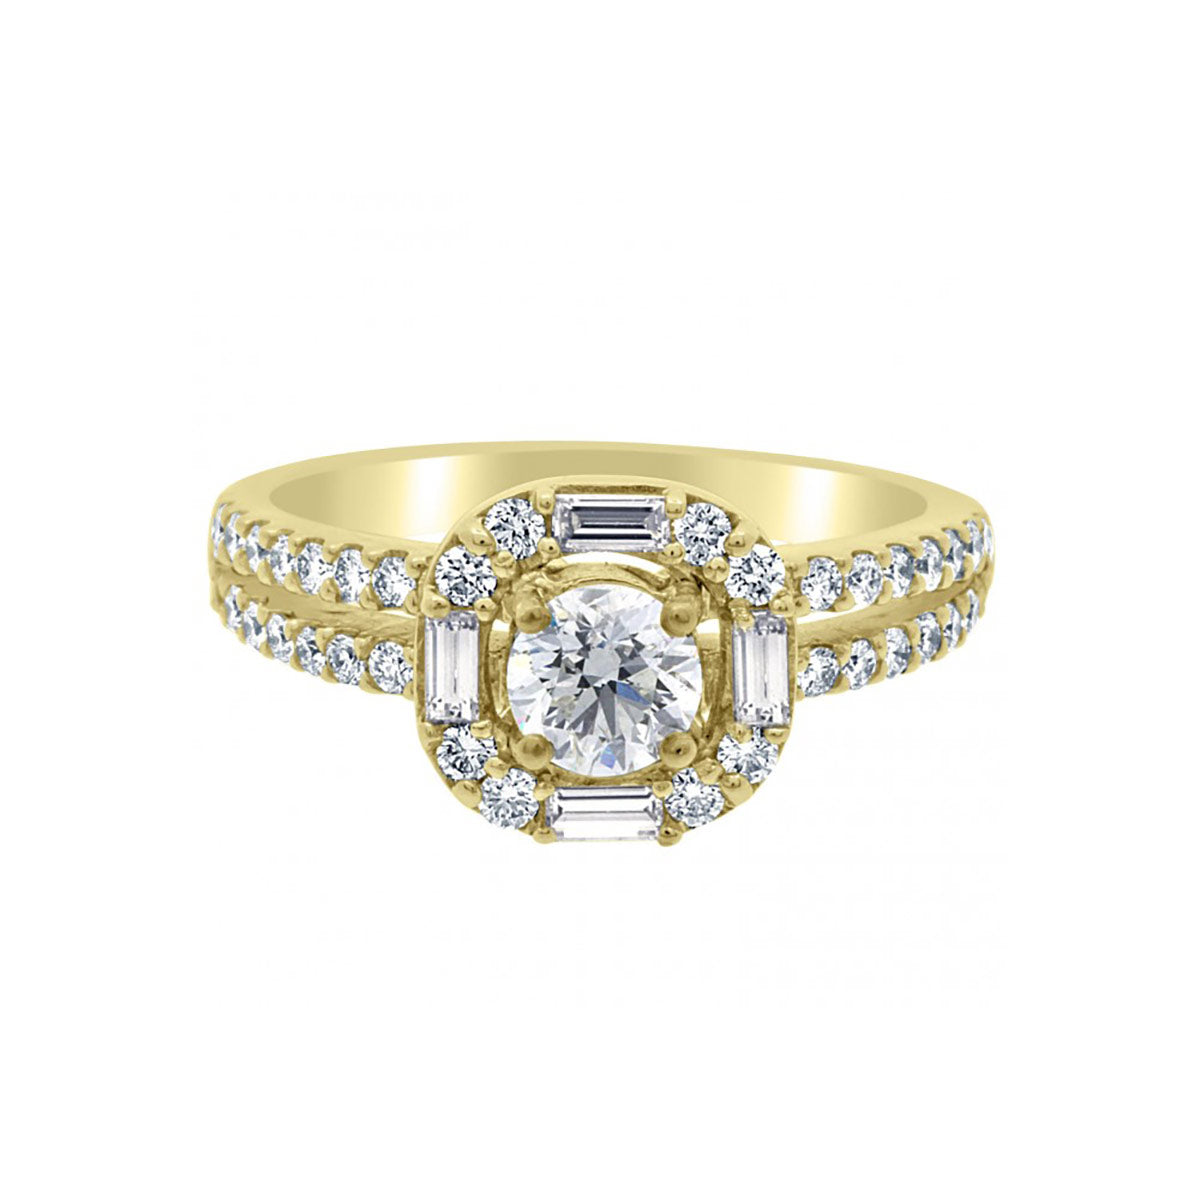 Baguette and Round Diamond Engagement Ring in yellow gold